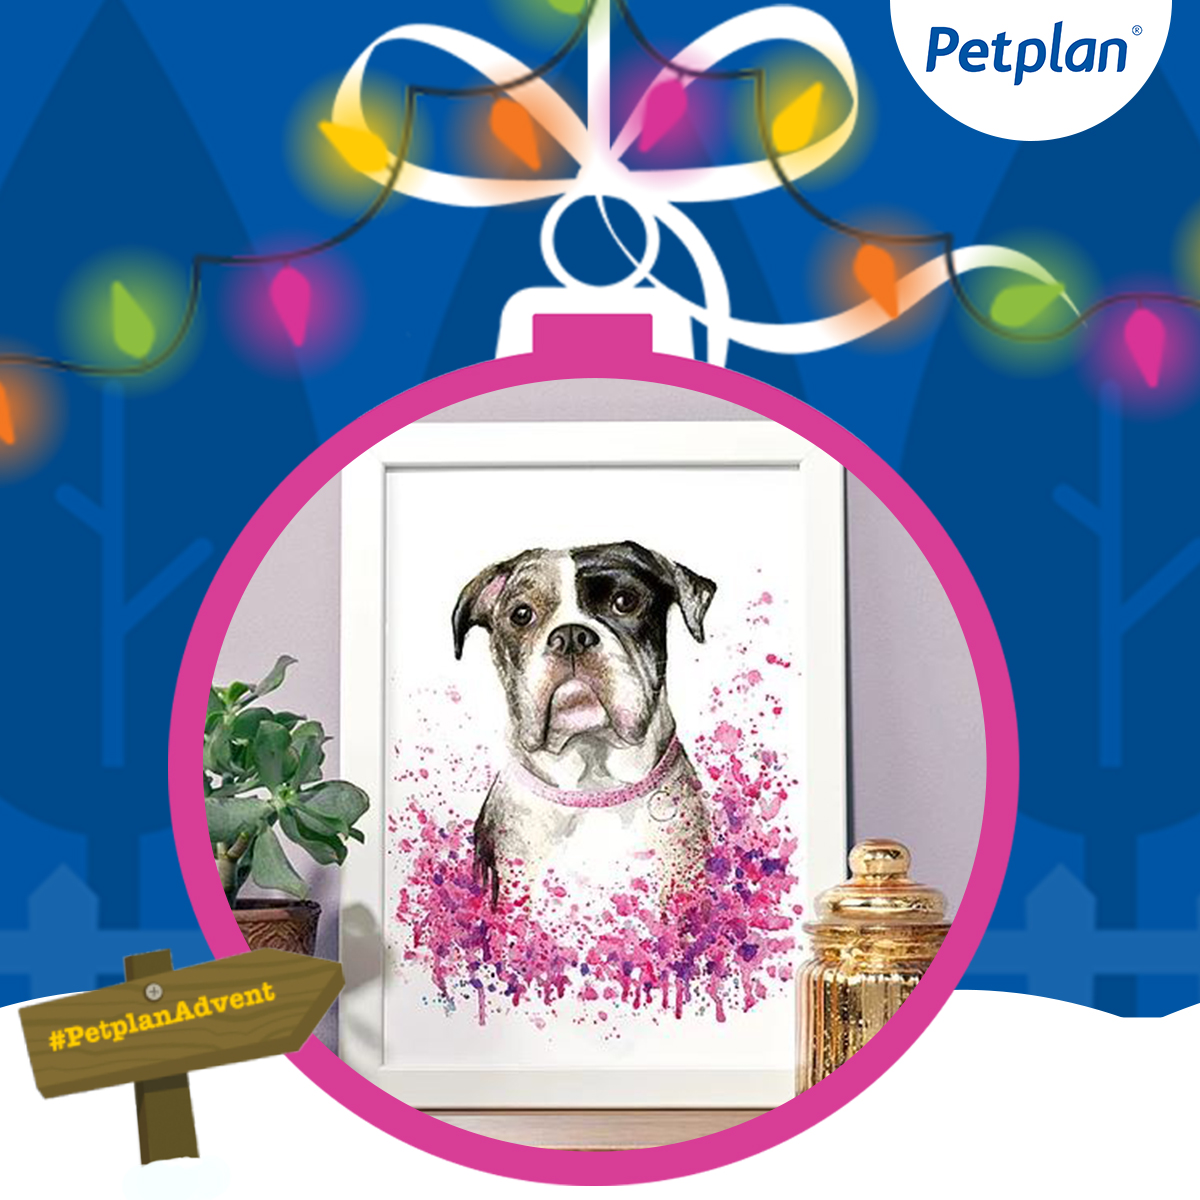 Strike a pose for day 23! For a gift to keep forever, enter the #PetplanAdvent calendar now at bit.ly/PetplanAdvent for your chance to win a voucher worth £200 and bag yourself a custom pet portrait by artist @AstridBrisson 🎨 Suitable for a dog, cat, rabbit or horse 🐶😸🐰🐴